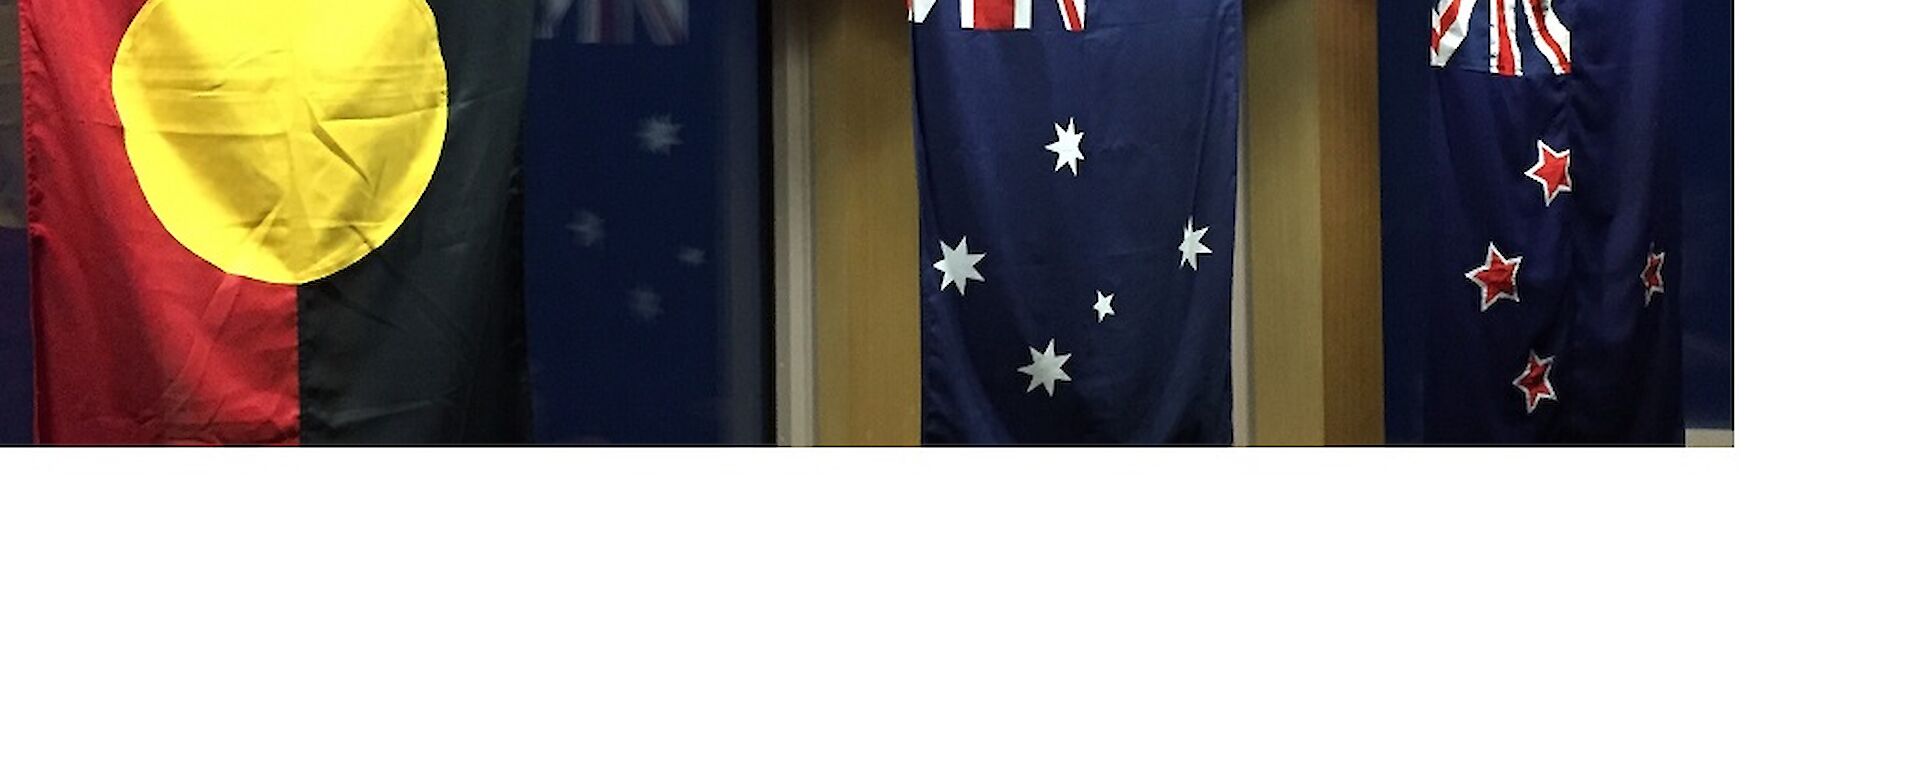 The Australian flag hung in the middle of the New Zealand flag and the Australian Aboriginal flag